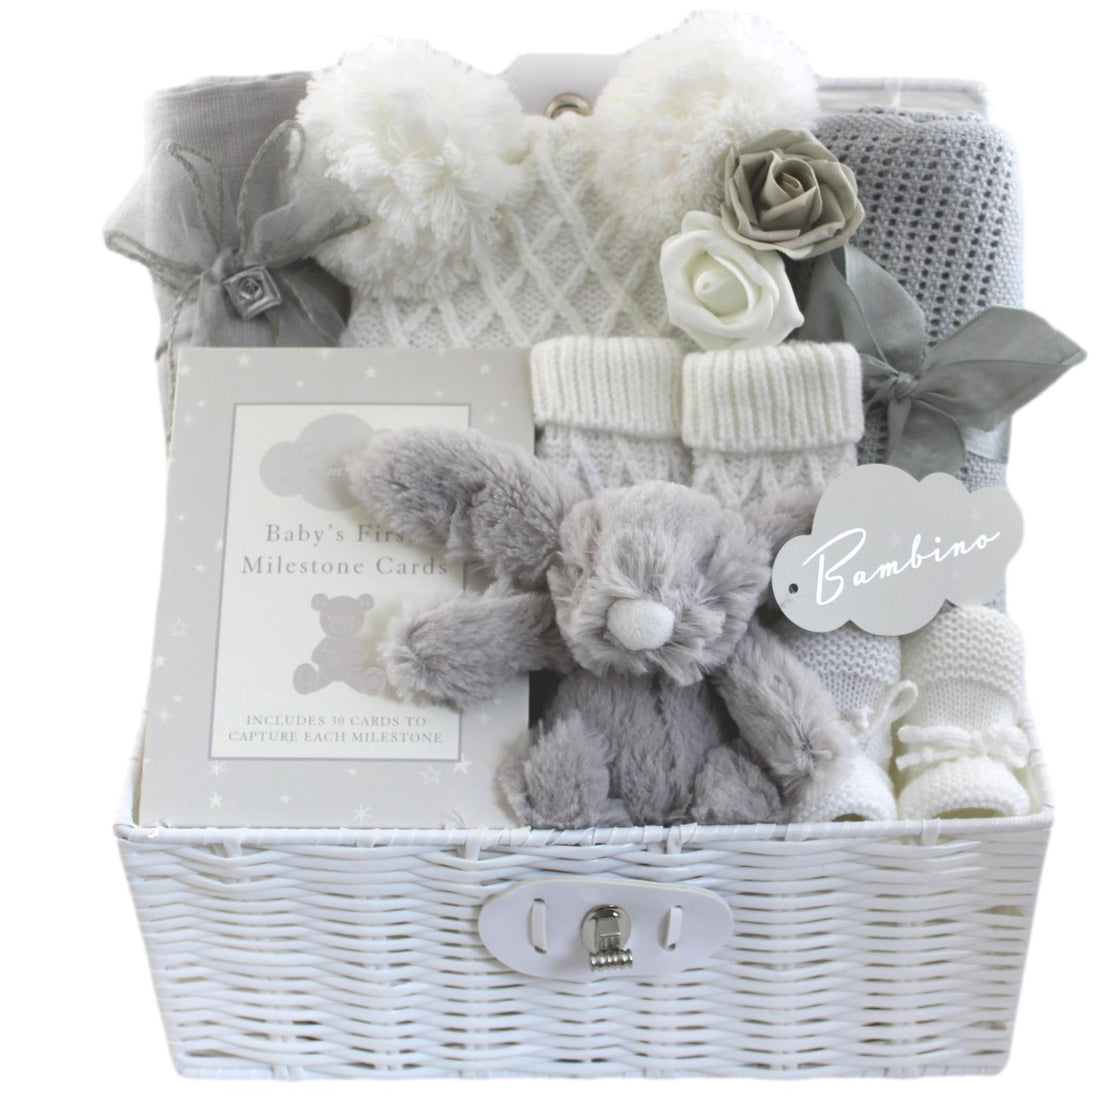 Itsy Unisex Baby Gift Hamper with Milestone Cards